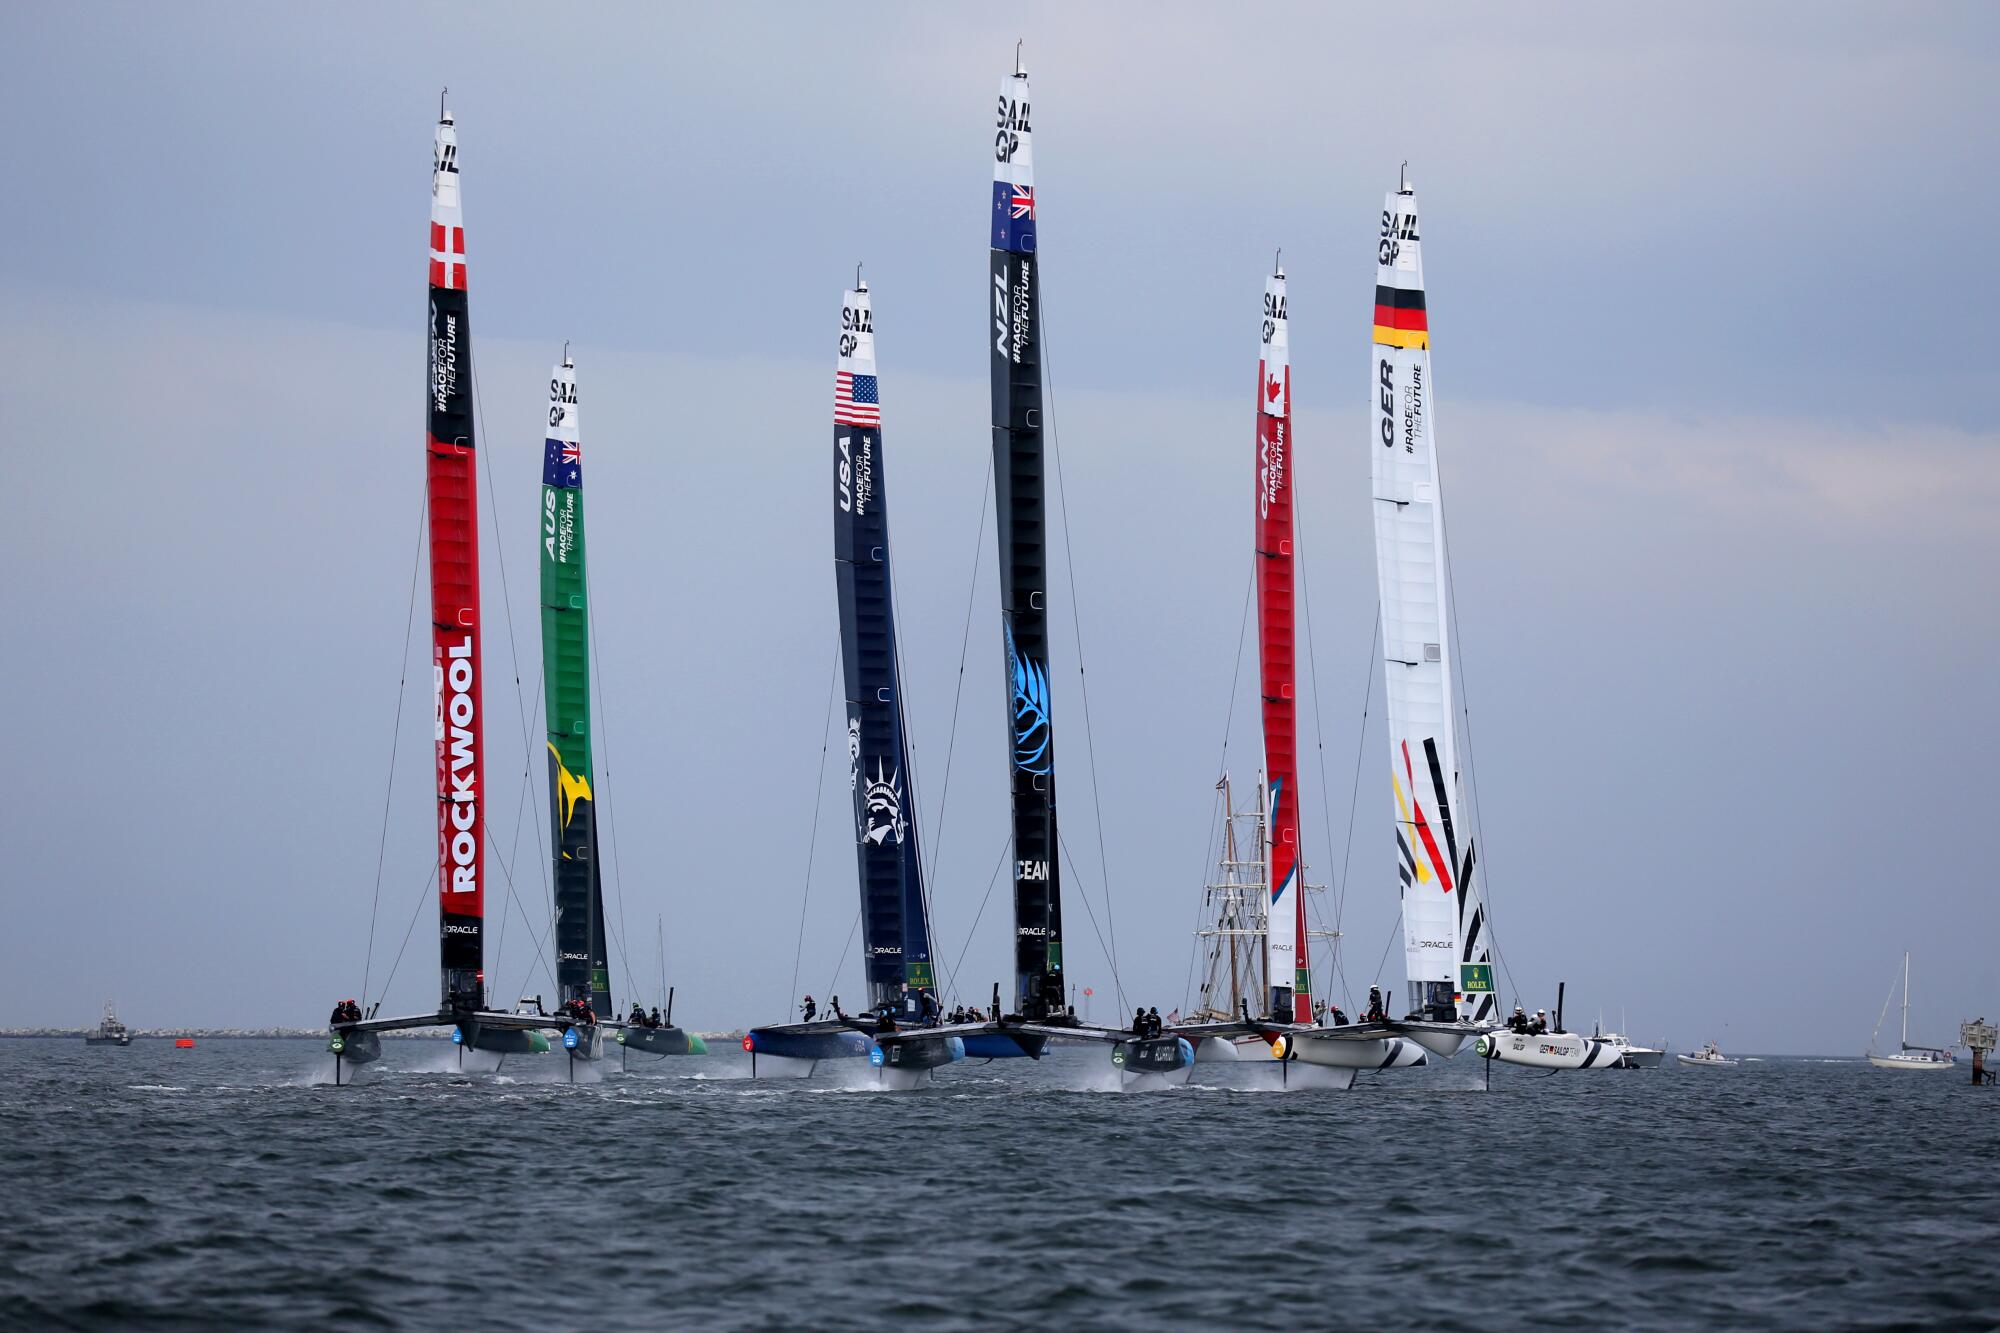 Oracle Los Angeles Sail Grand Prix at the Port of Los Angeles on Sunday, July 23, 